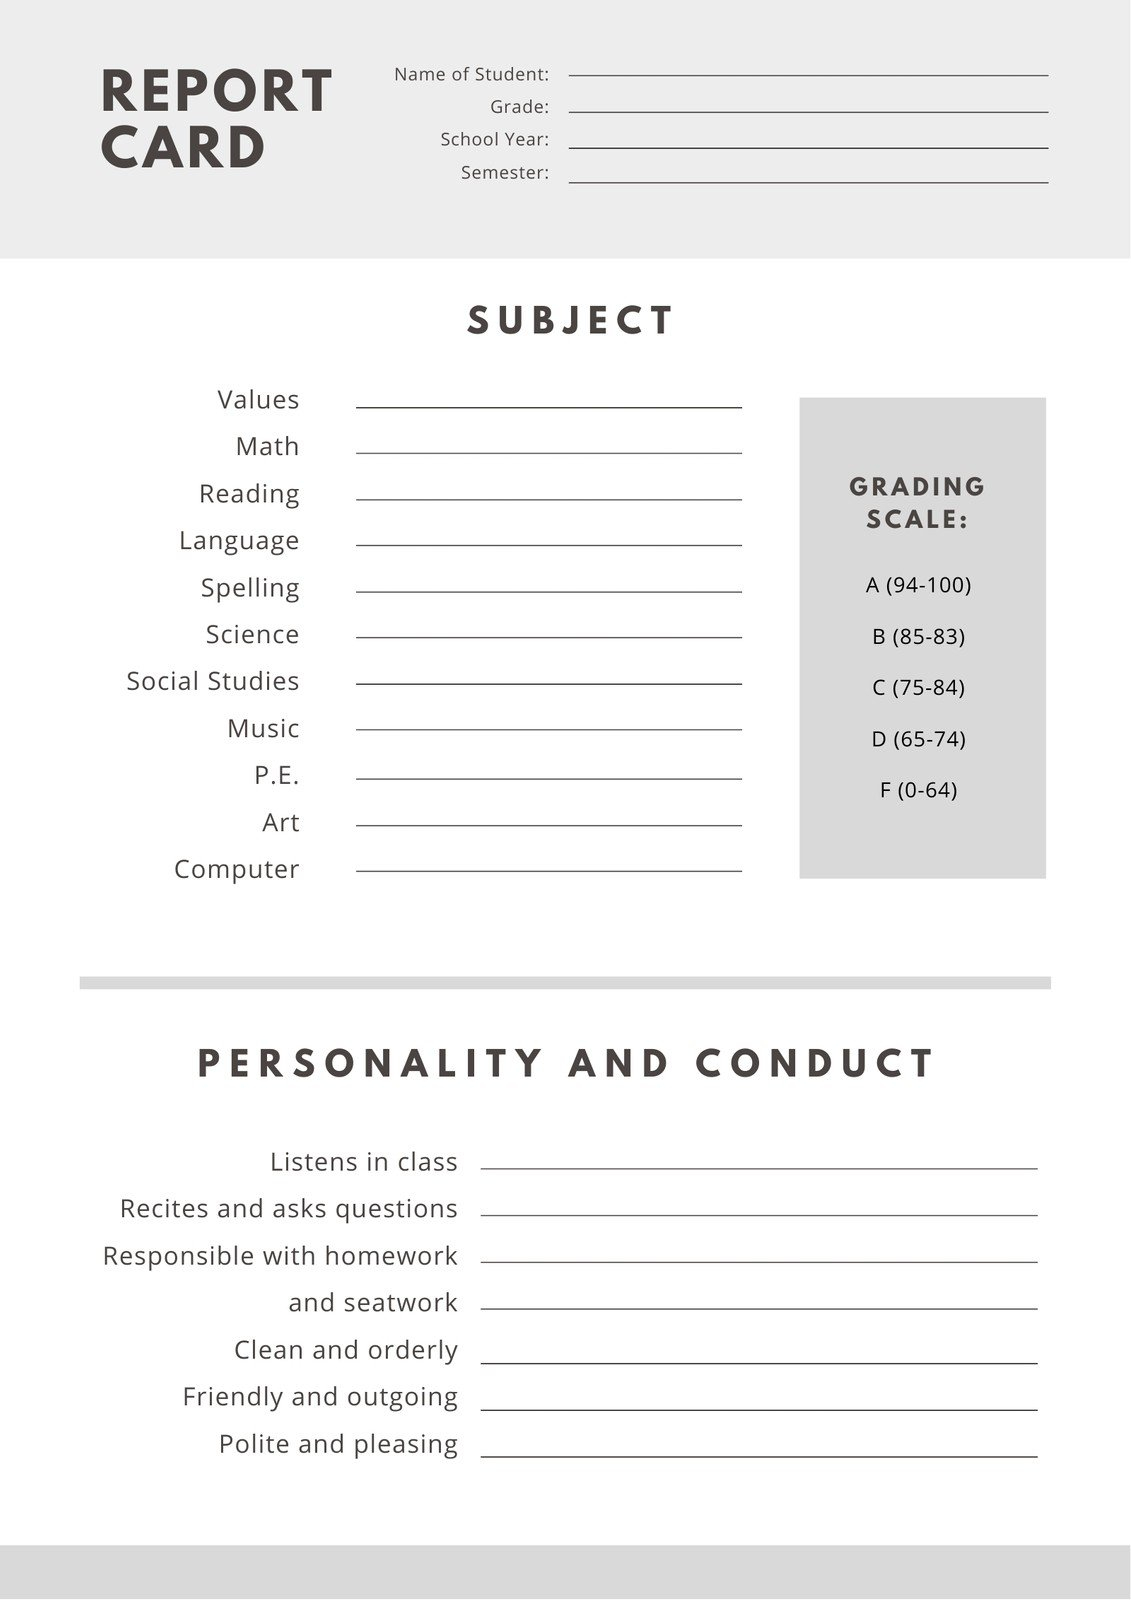 Free, printable, customizable report card templates  Canva Pertaining To Report Card Template Pdf